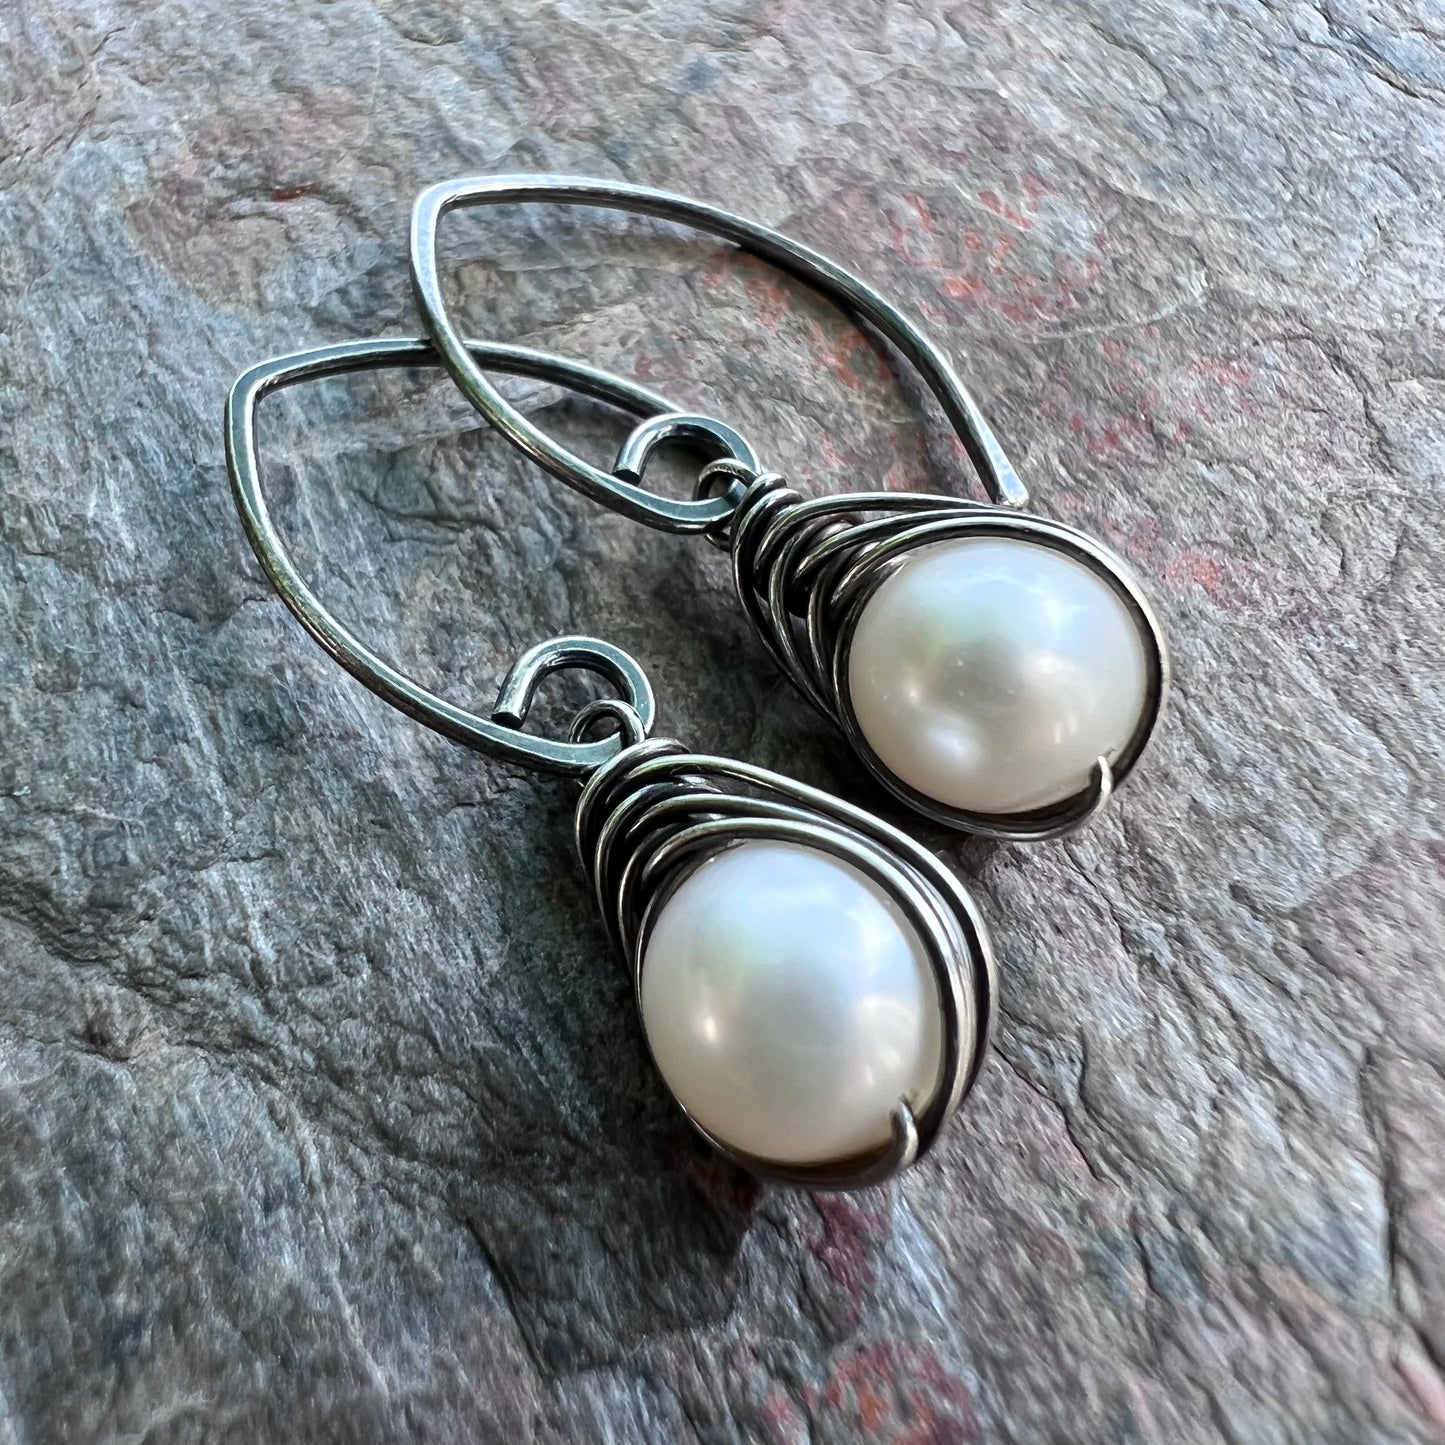 Sterling Silver Pearl Earrings - Genuine Freshwater Pearls Wrapped in Sterling Silver Wire